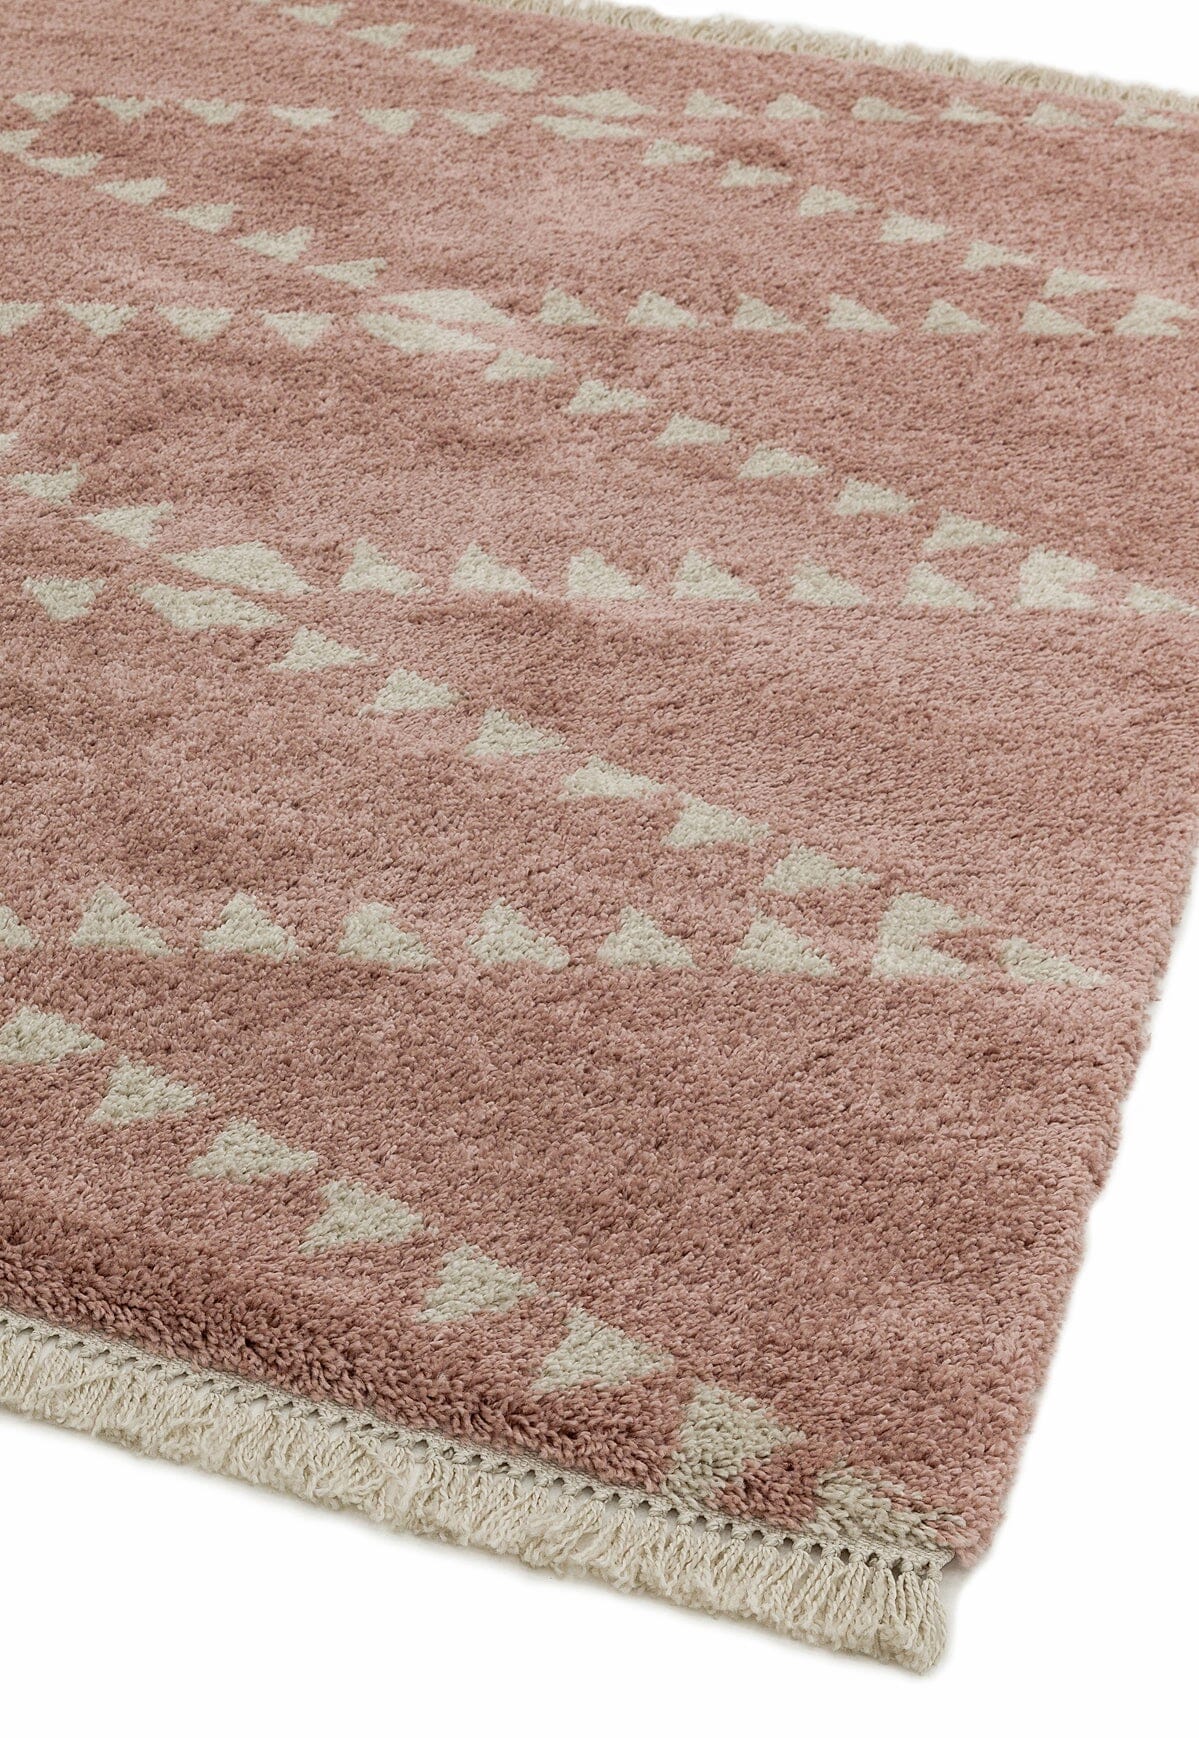 Asiatic Carpets Rocco Machine Woven Rug PINK - 160 x 230cm